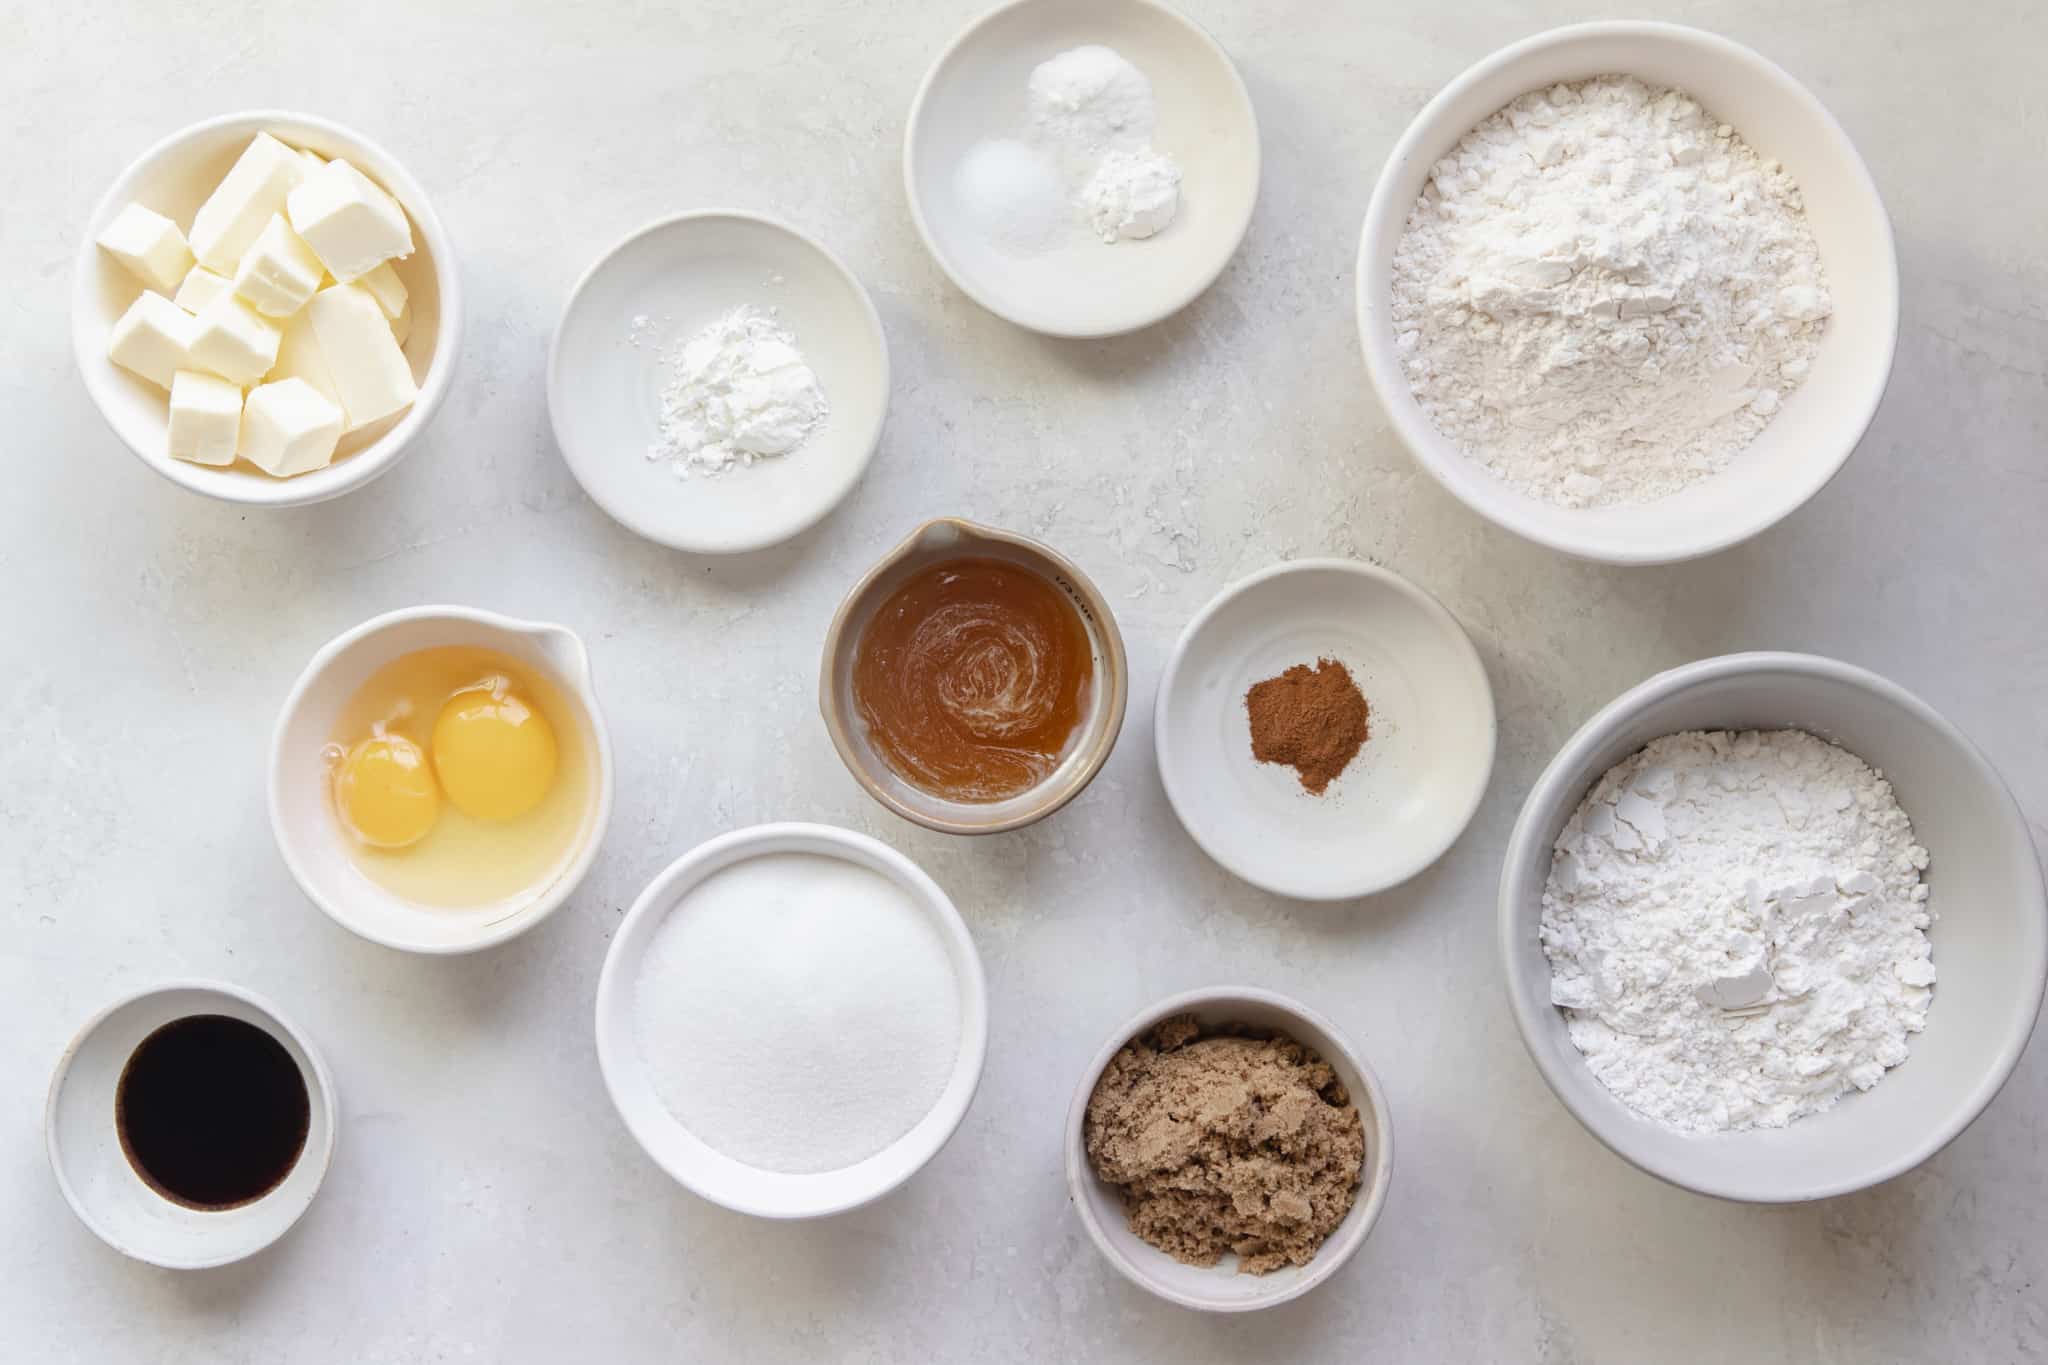 ingredients needed to make honey cookies in small bowls